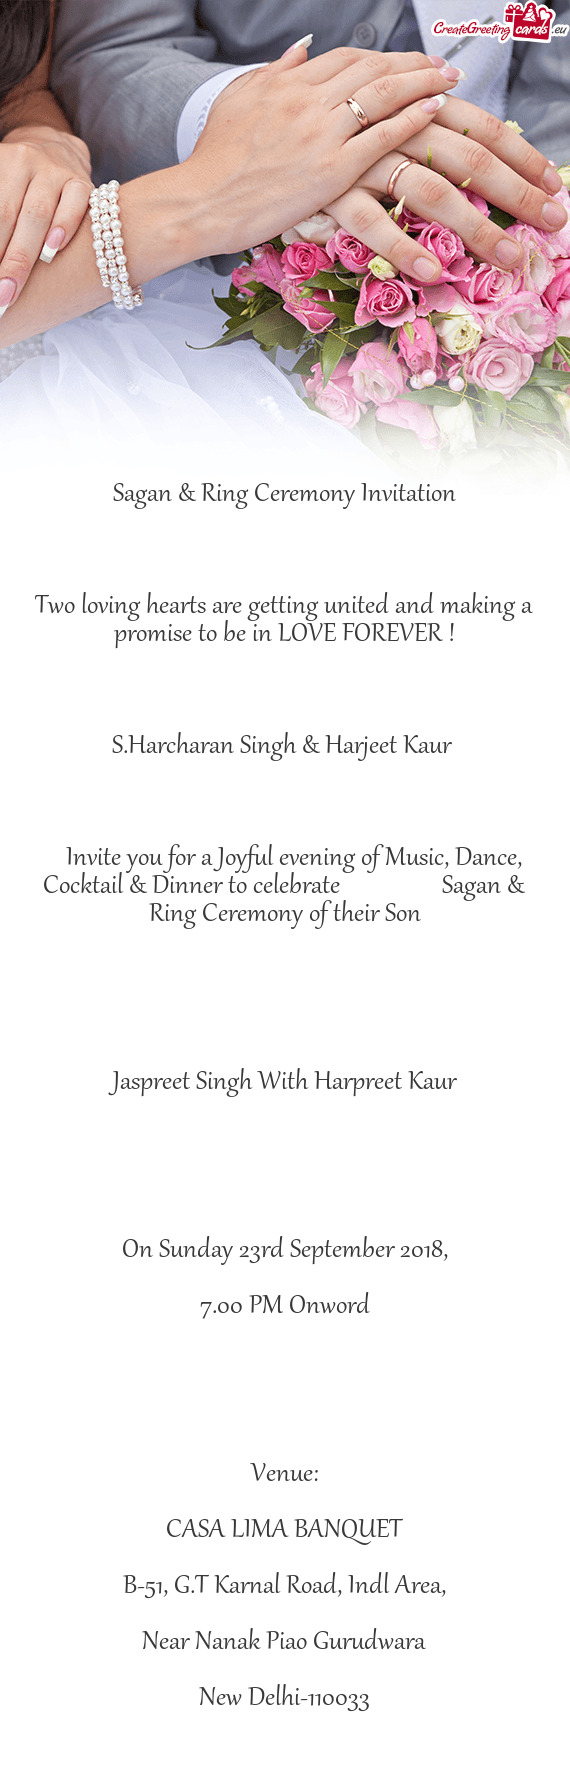 Invite you for a Joyful evening of Music, Dance, Cocktail & Dinner to celebrate     S